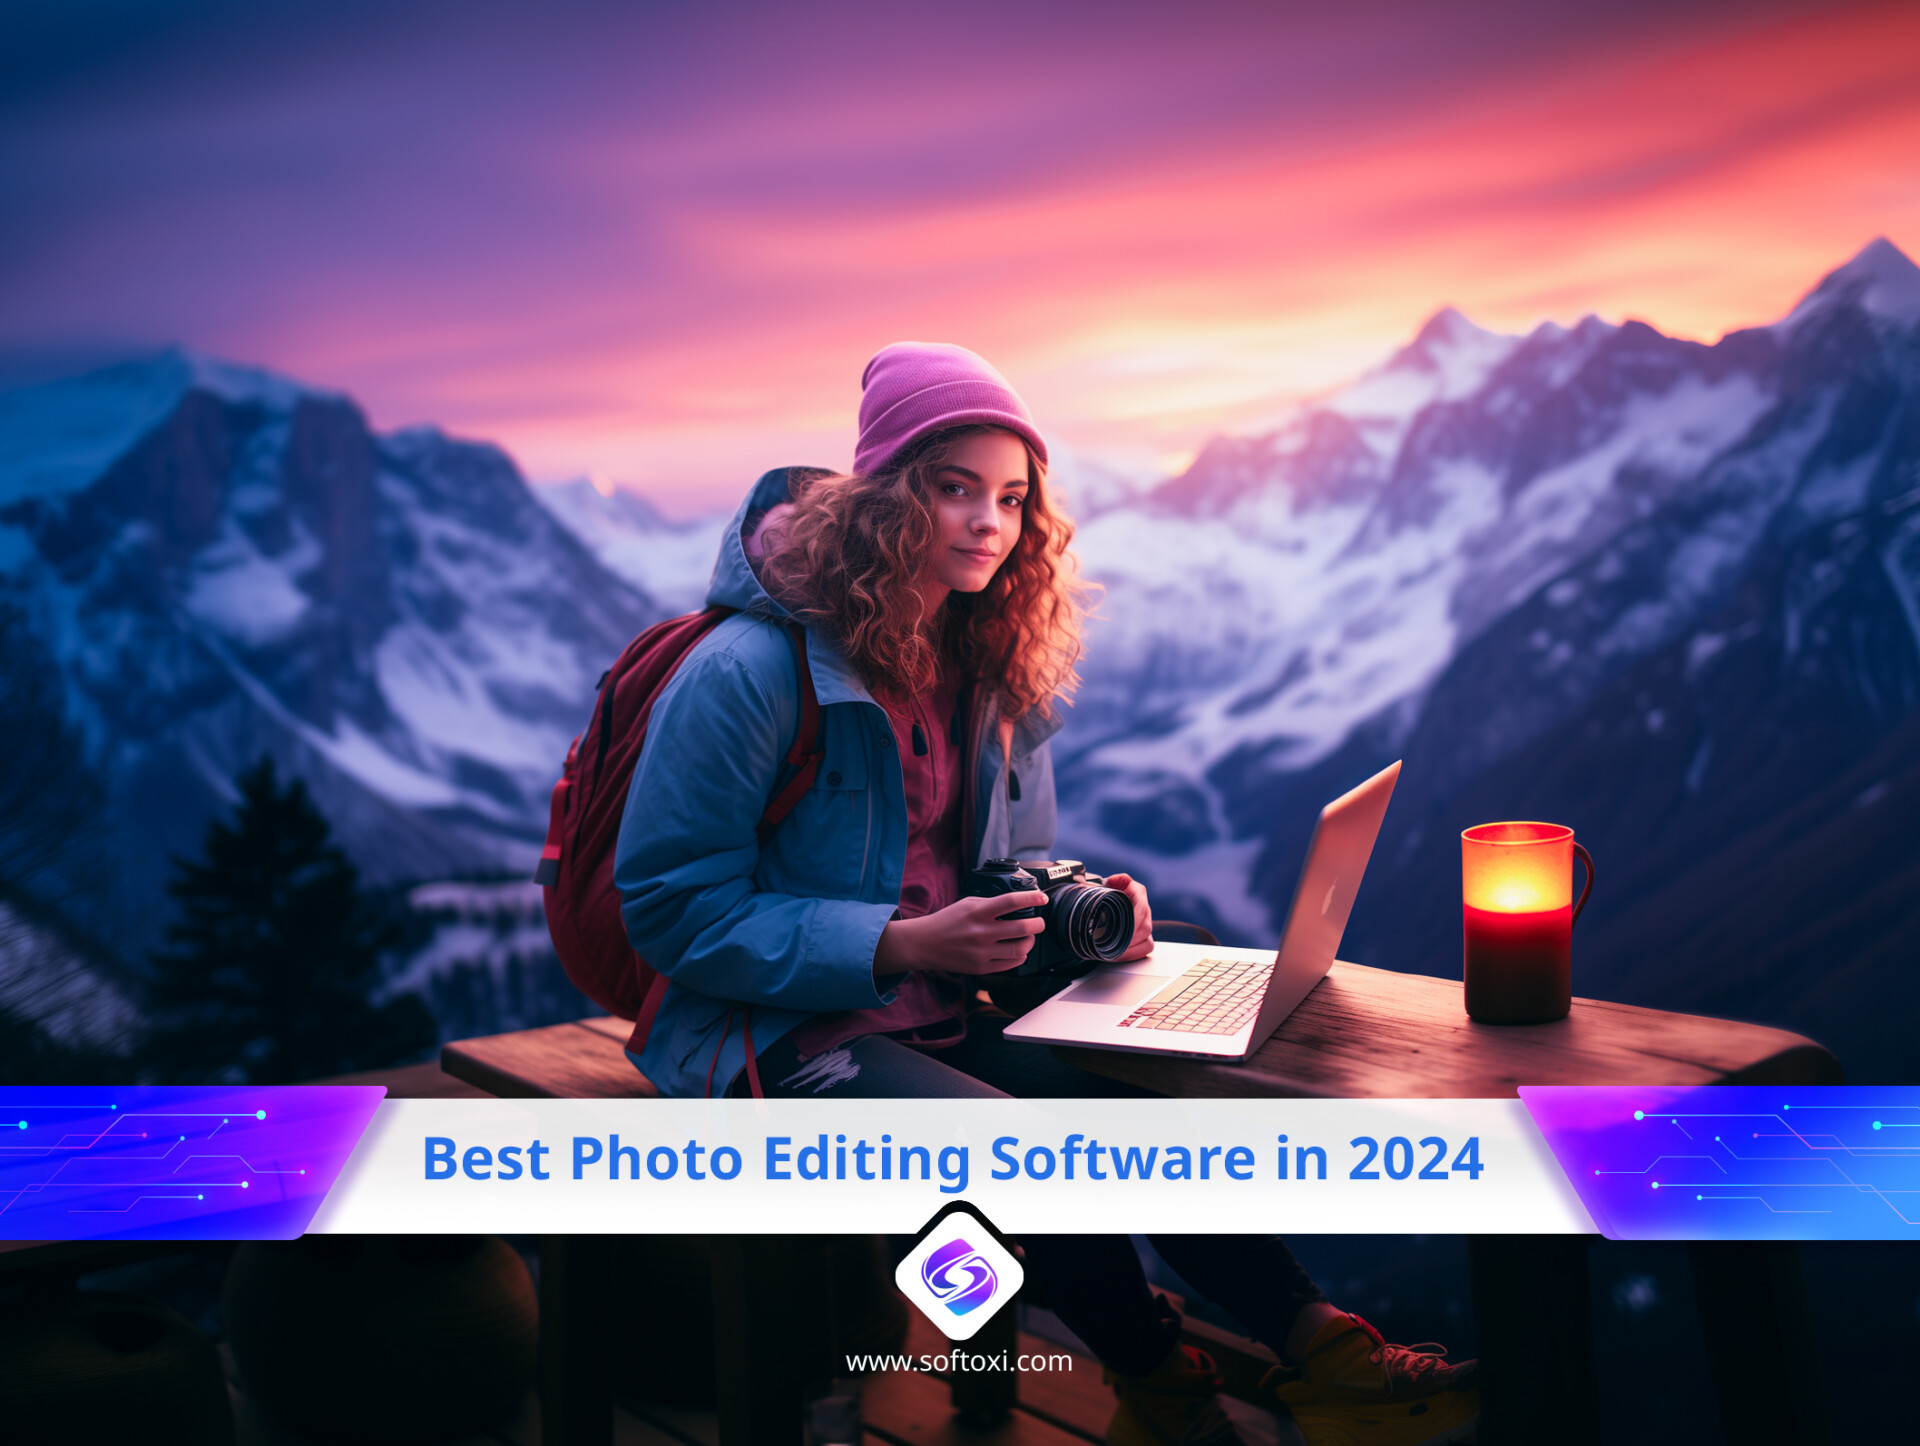 Best Photo Editing Software in 2024 Softoxi